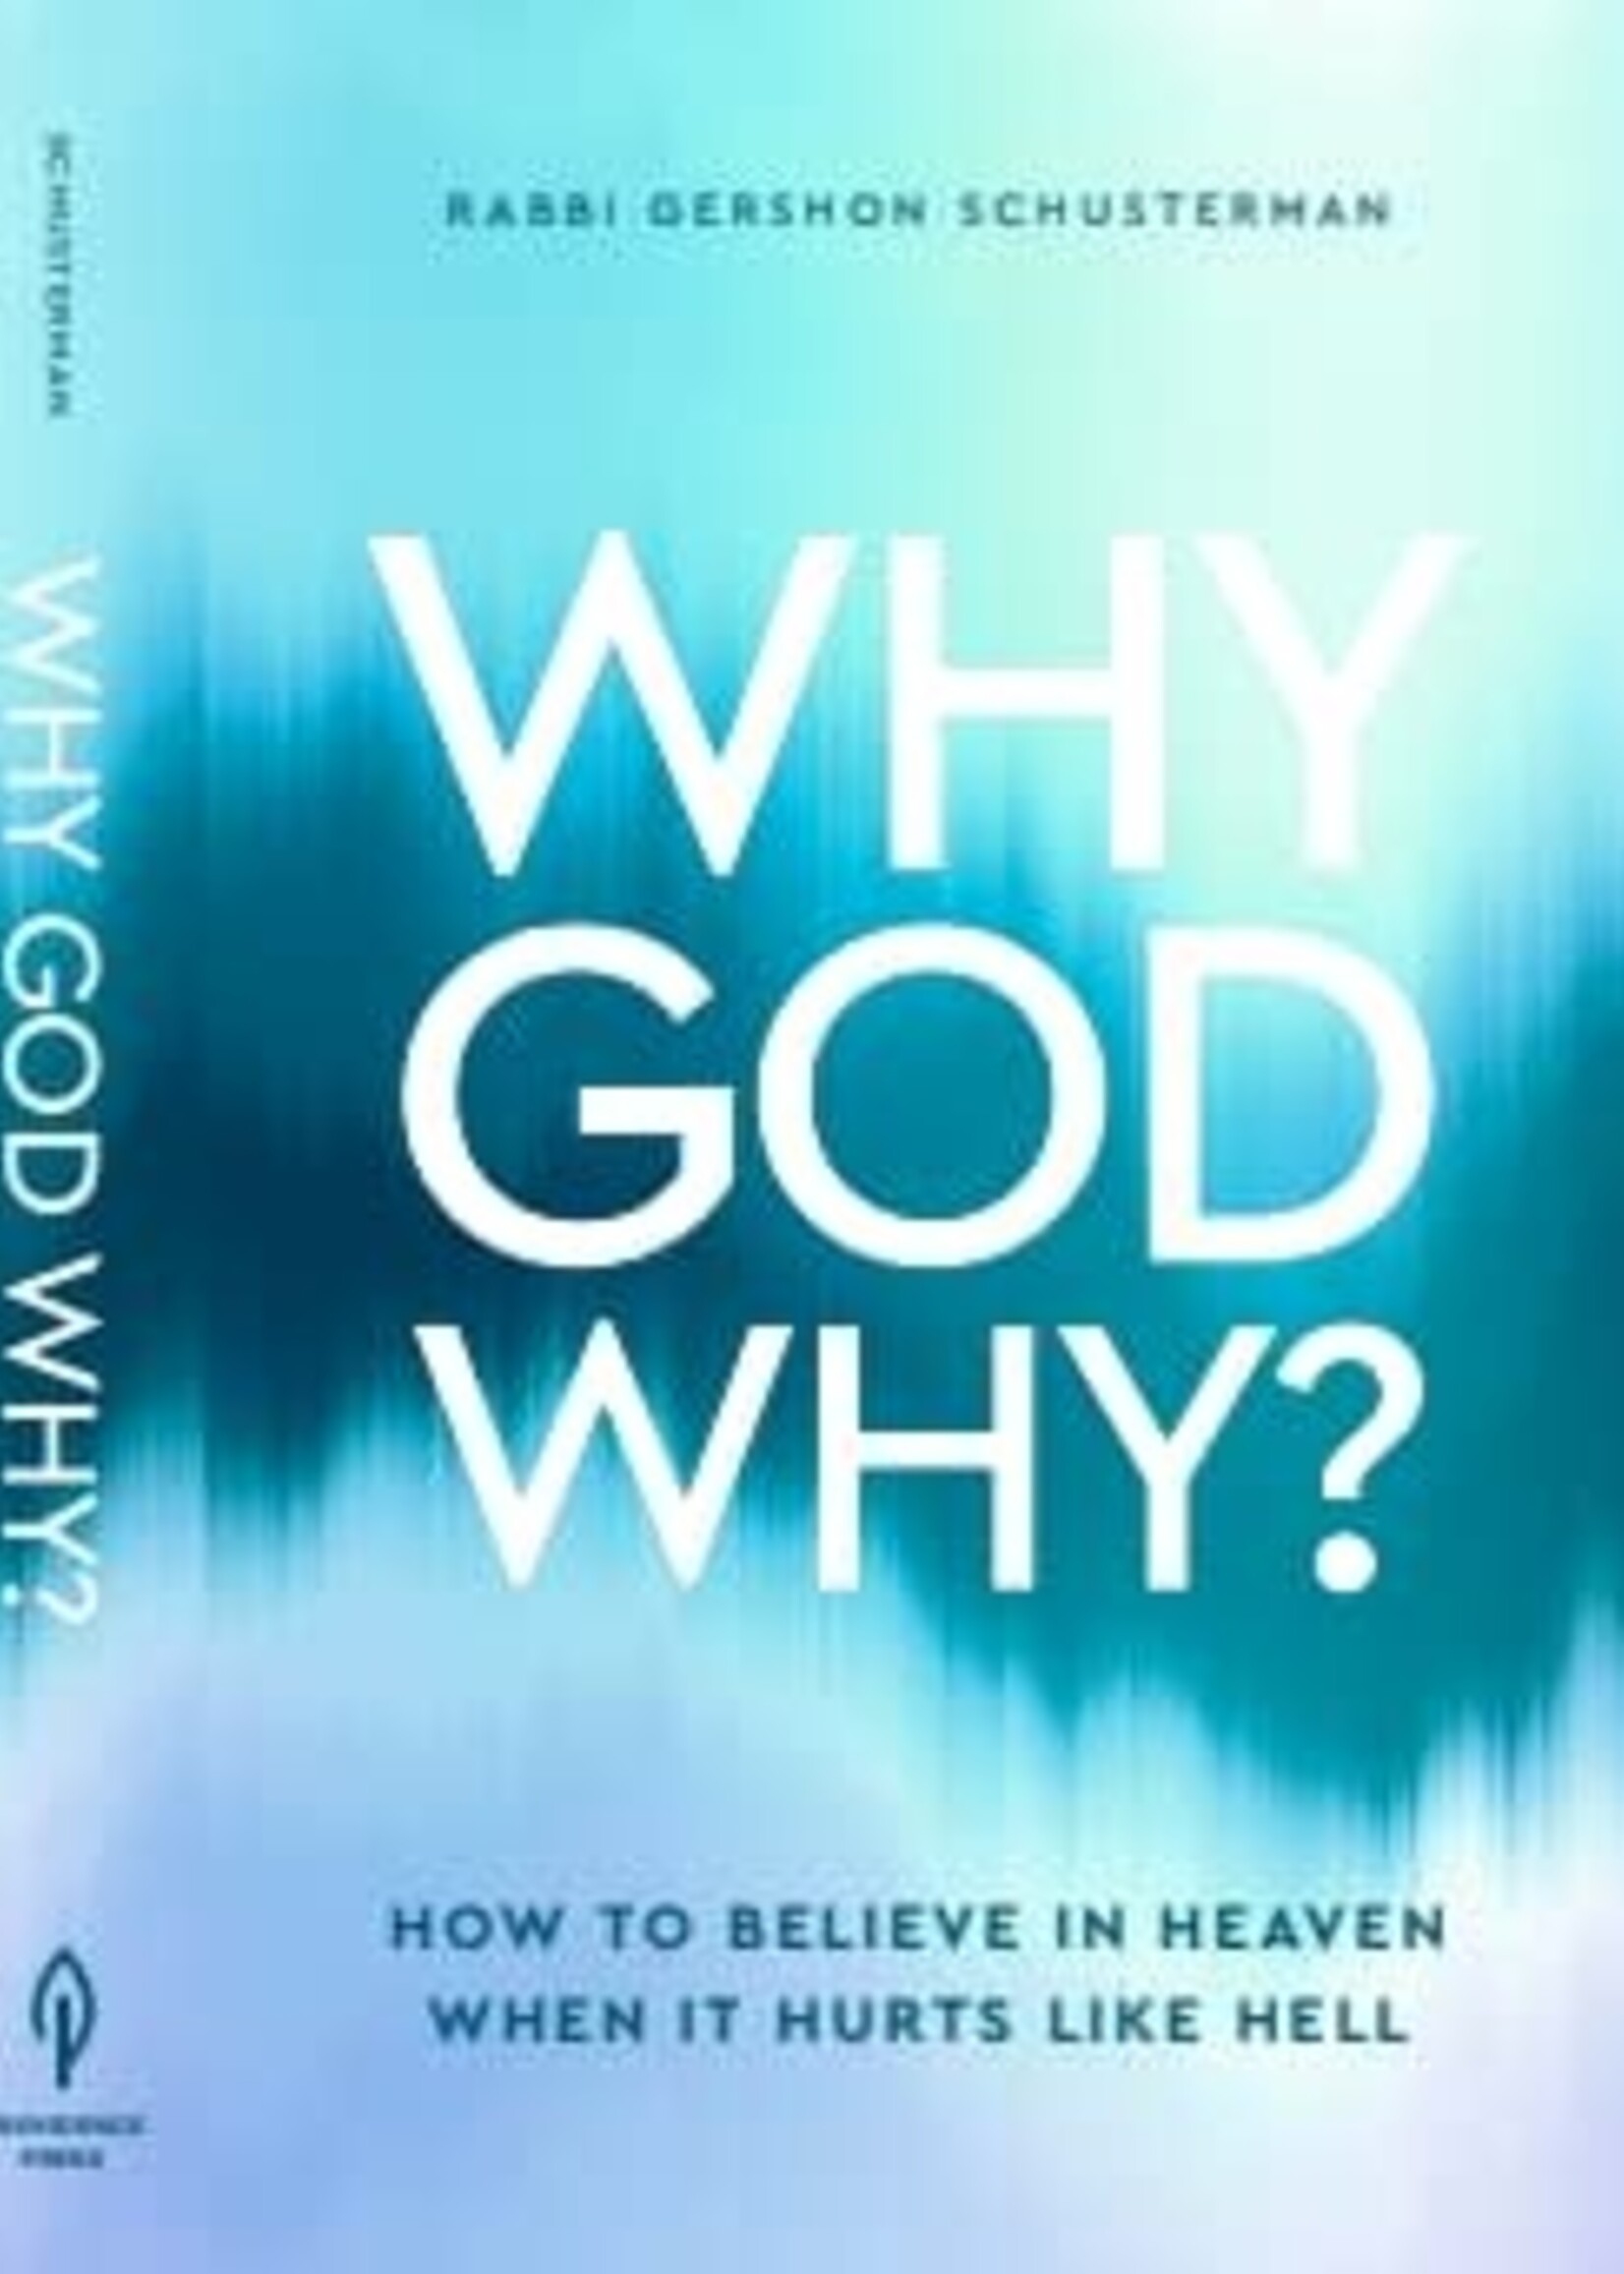 Rabbi Gershon Schusterman Why God Why? How to Believe in Heaven when it Hurts like Hell